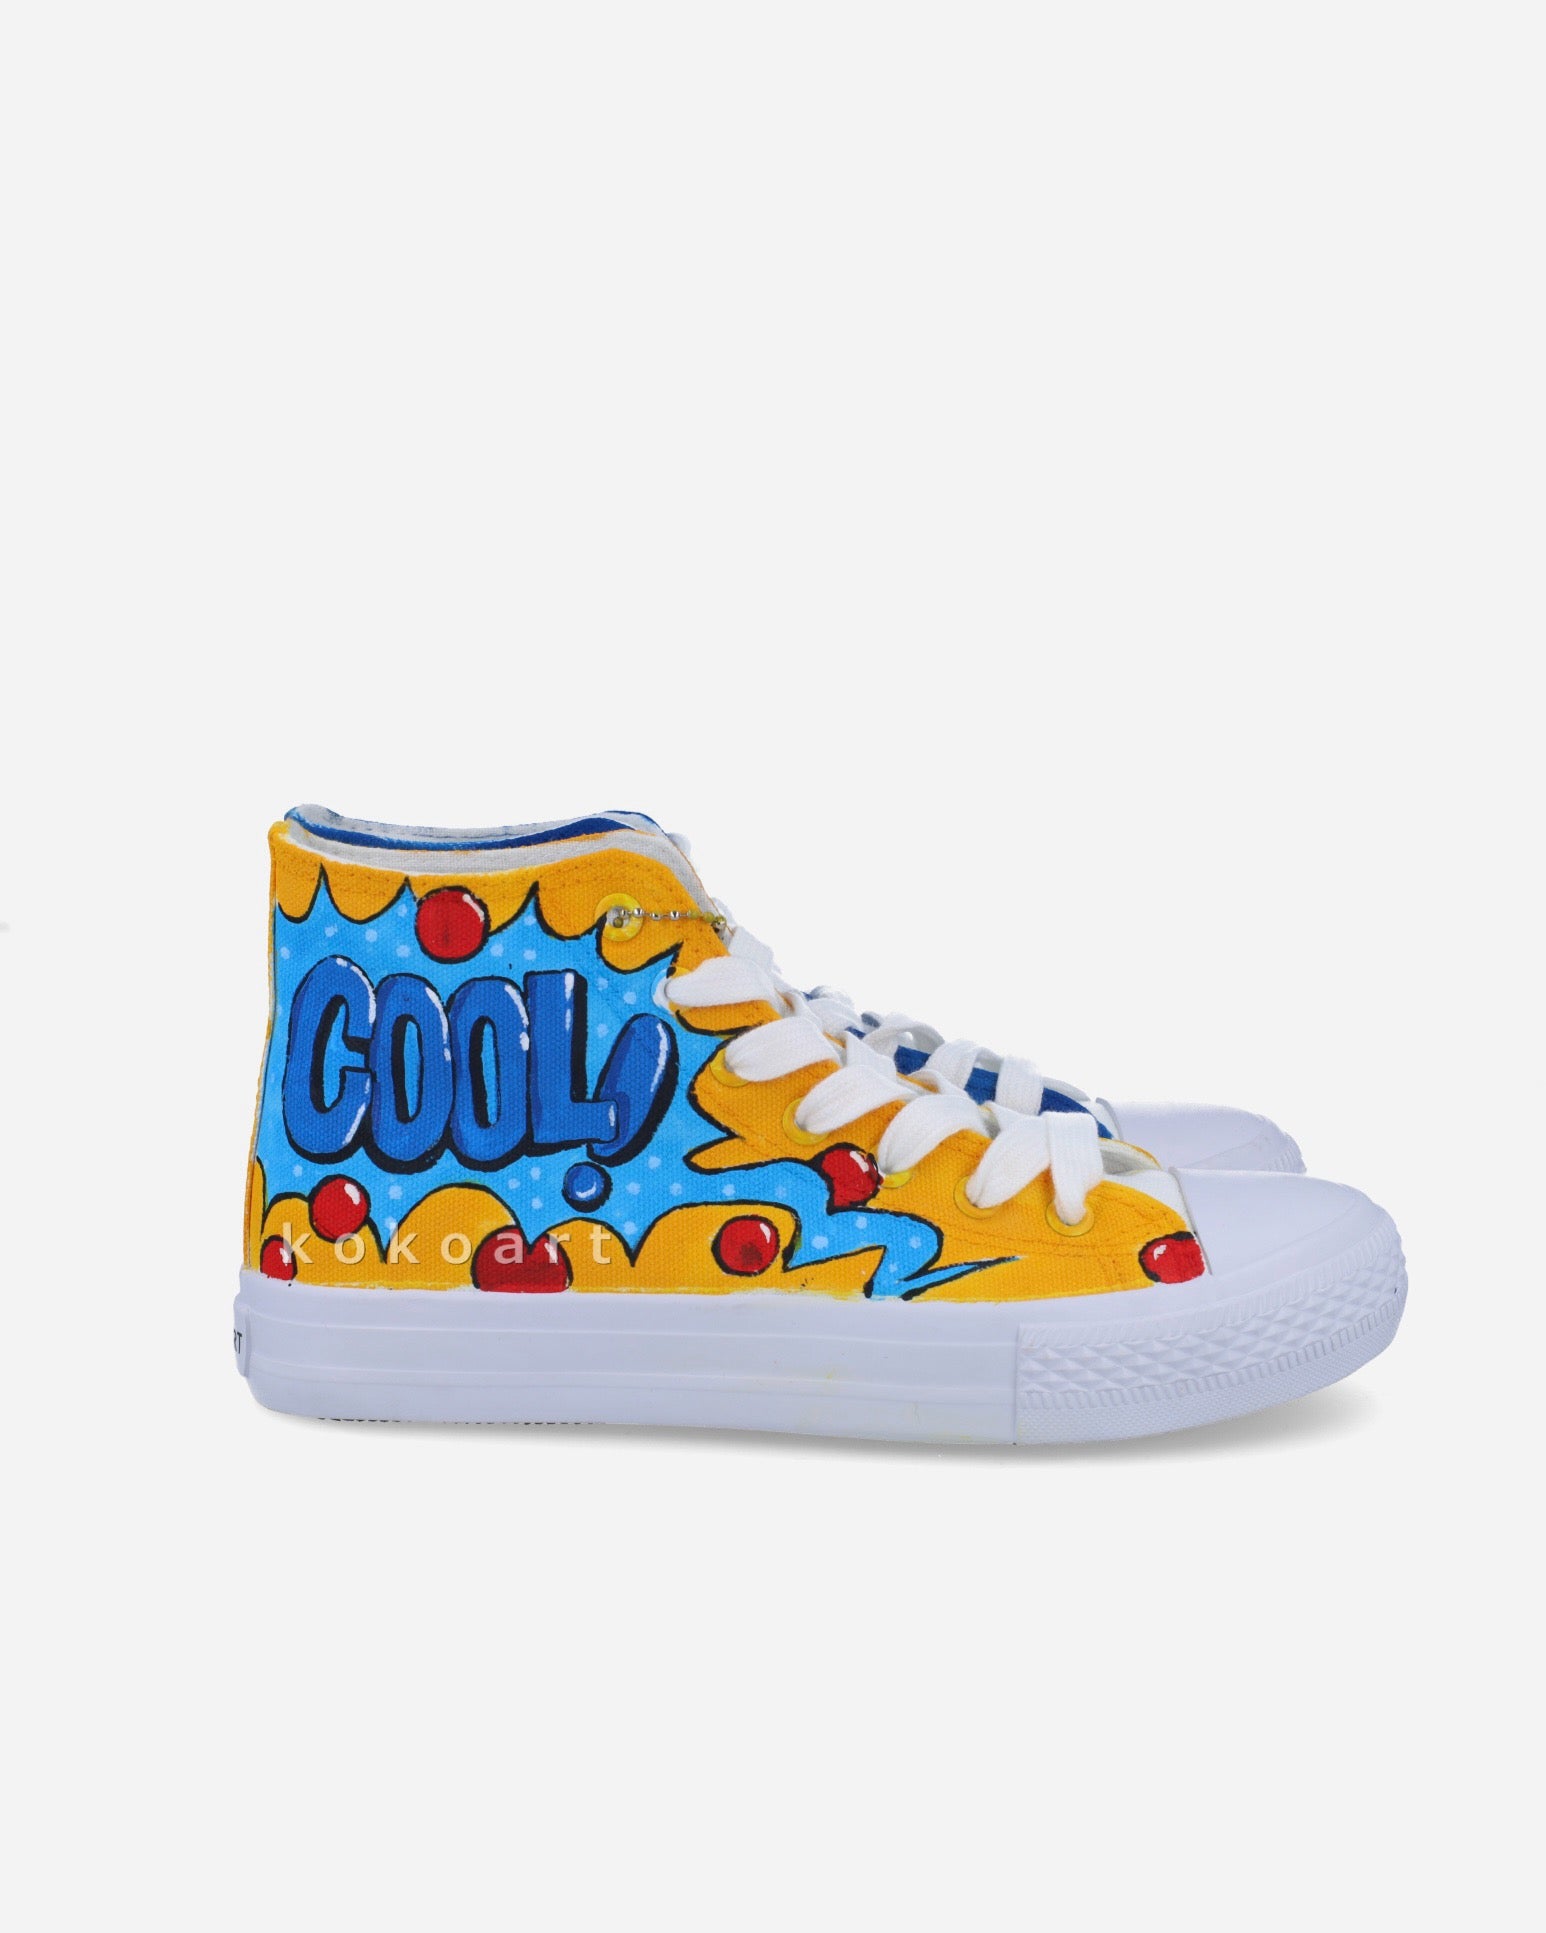 WOW Hand Painted Shoes